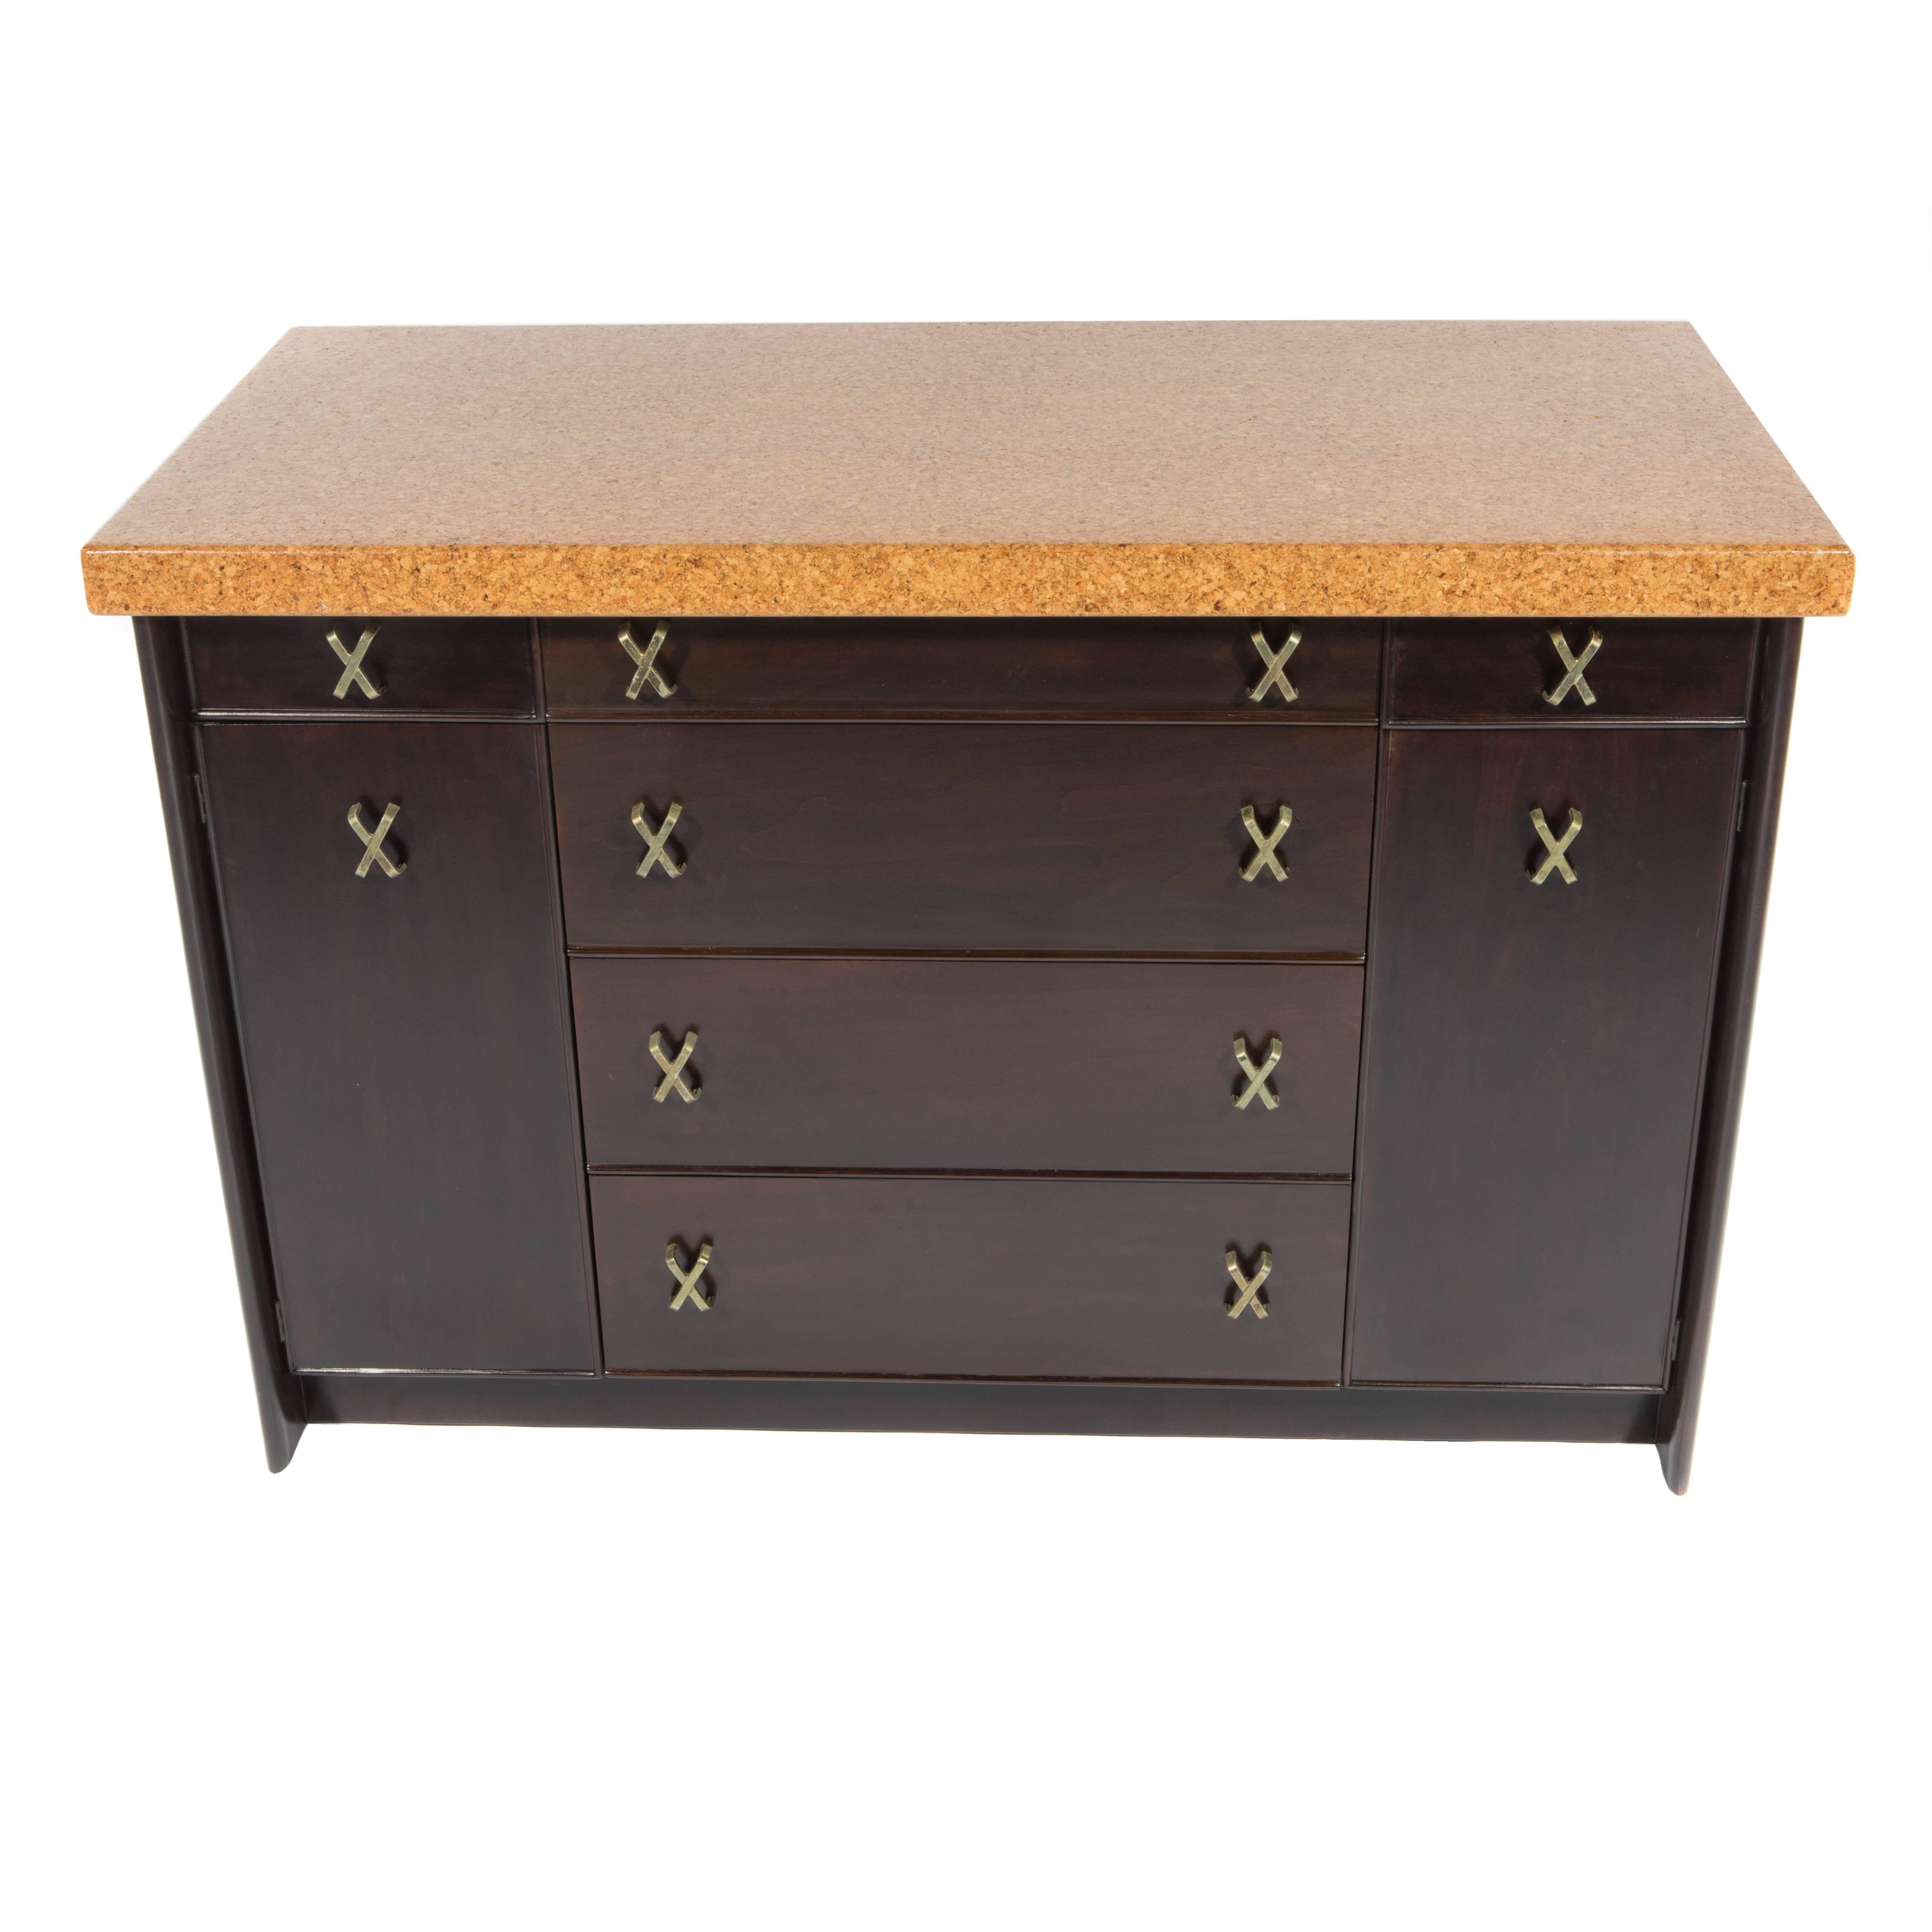 Versatile and beautifully made 1950s mahogany cabinet with Frankl's signature cork top and x-shaped brass pulls. In beautifully restored condition. Top drawer features felt-lined dividers for flatware. 

See this item in our Brooklyn showroom, 61